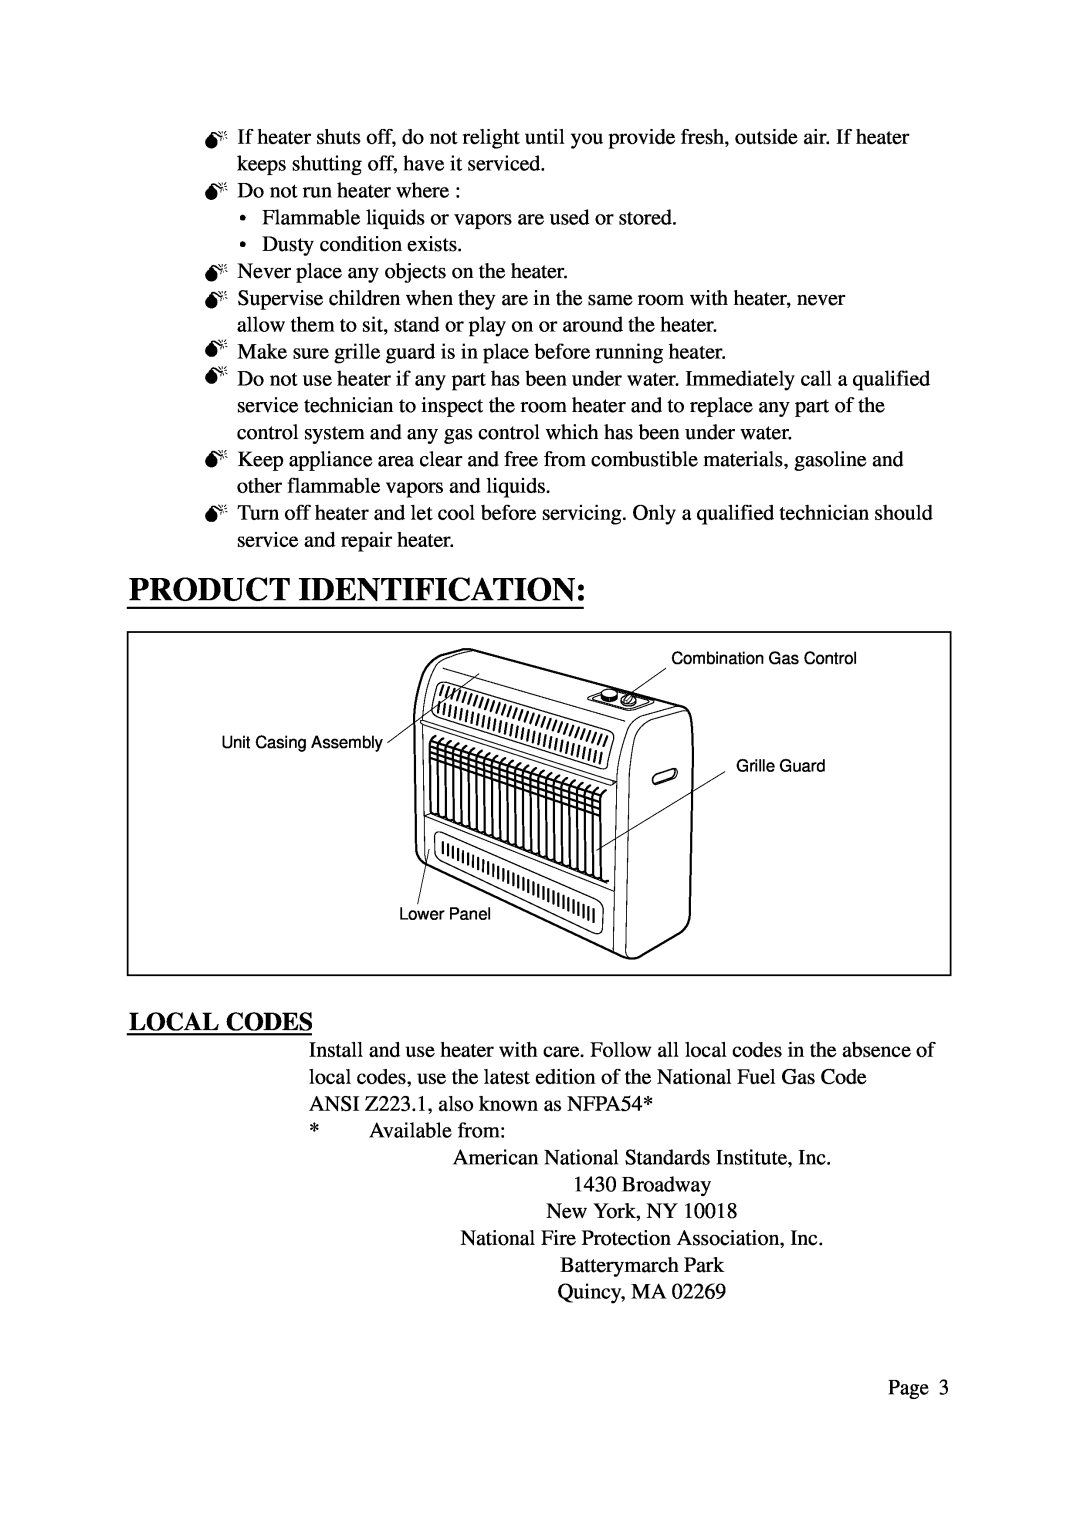 DreamGEAR P186, P314, N313, N185 installation manual Product Identification, Local Codes 